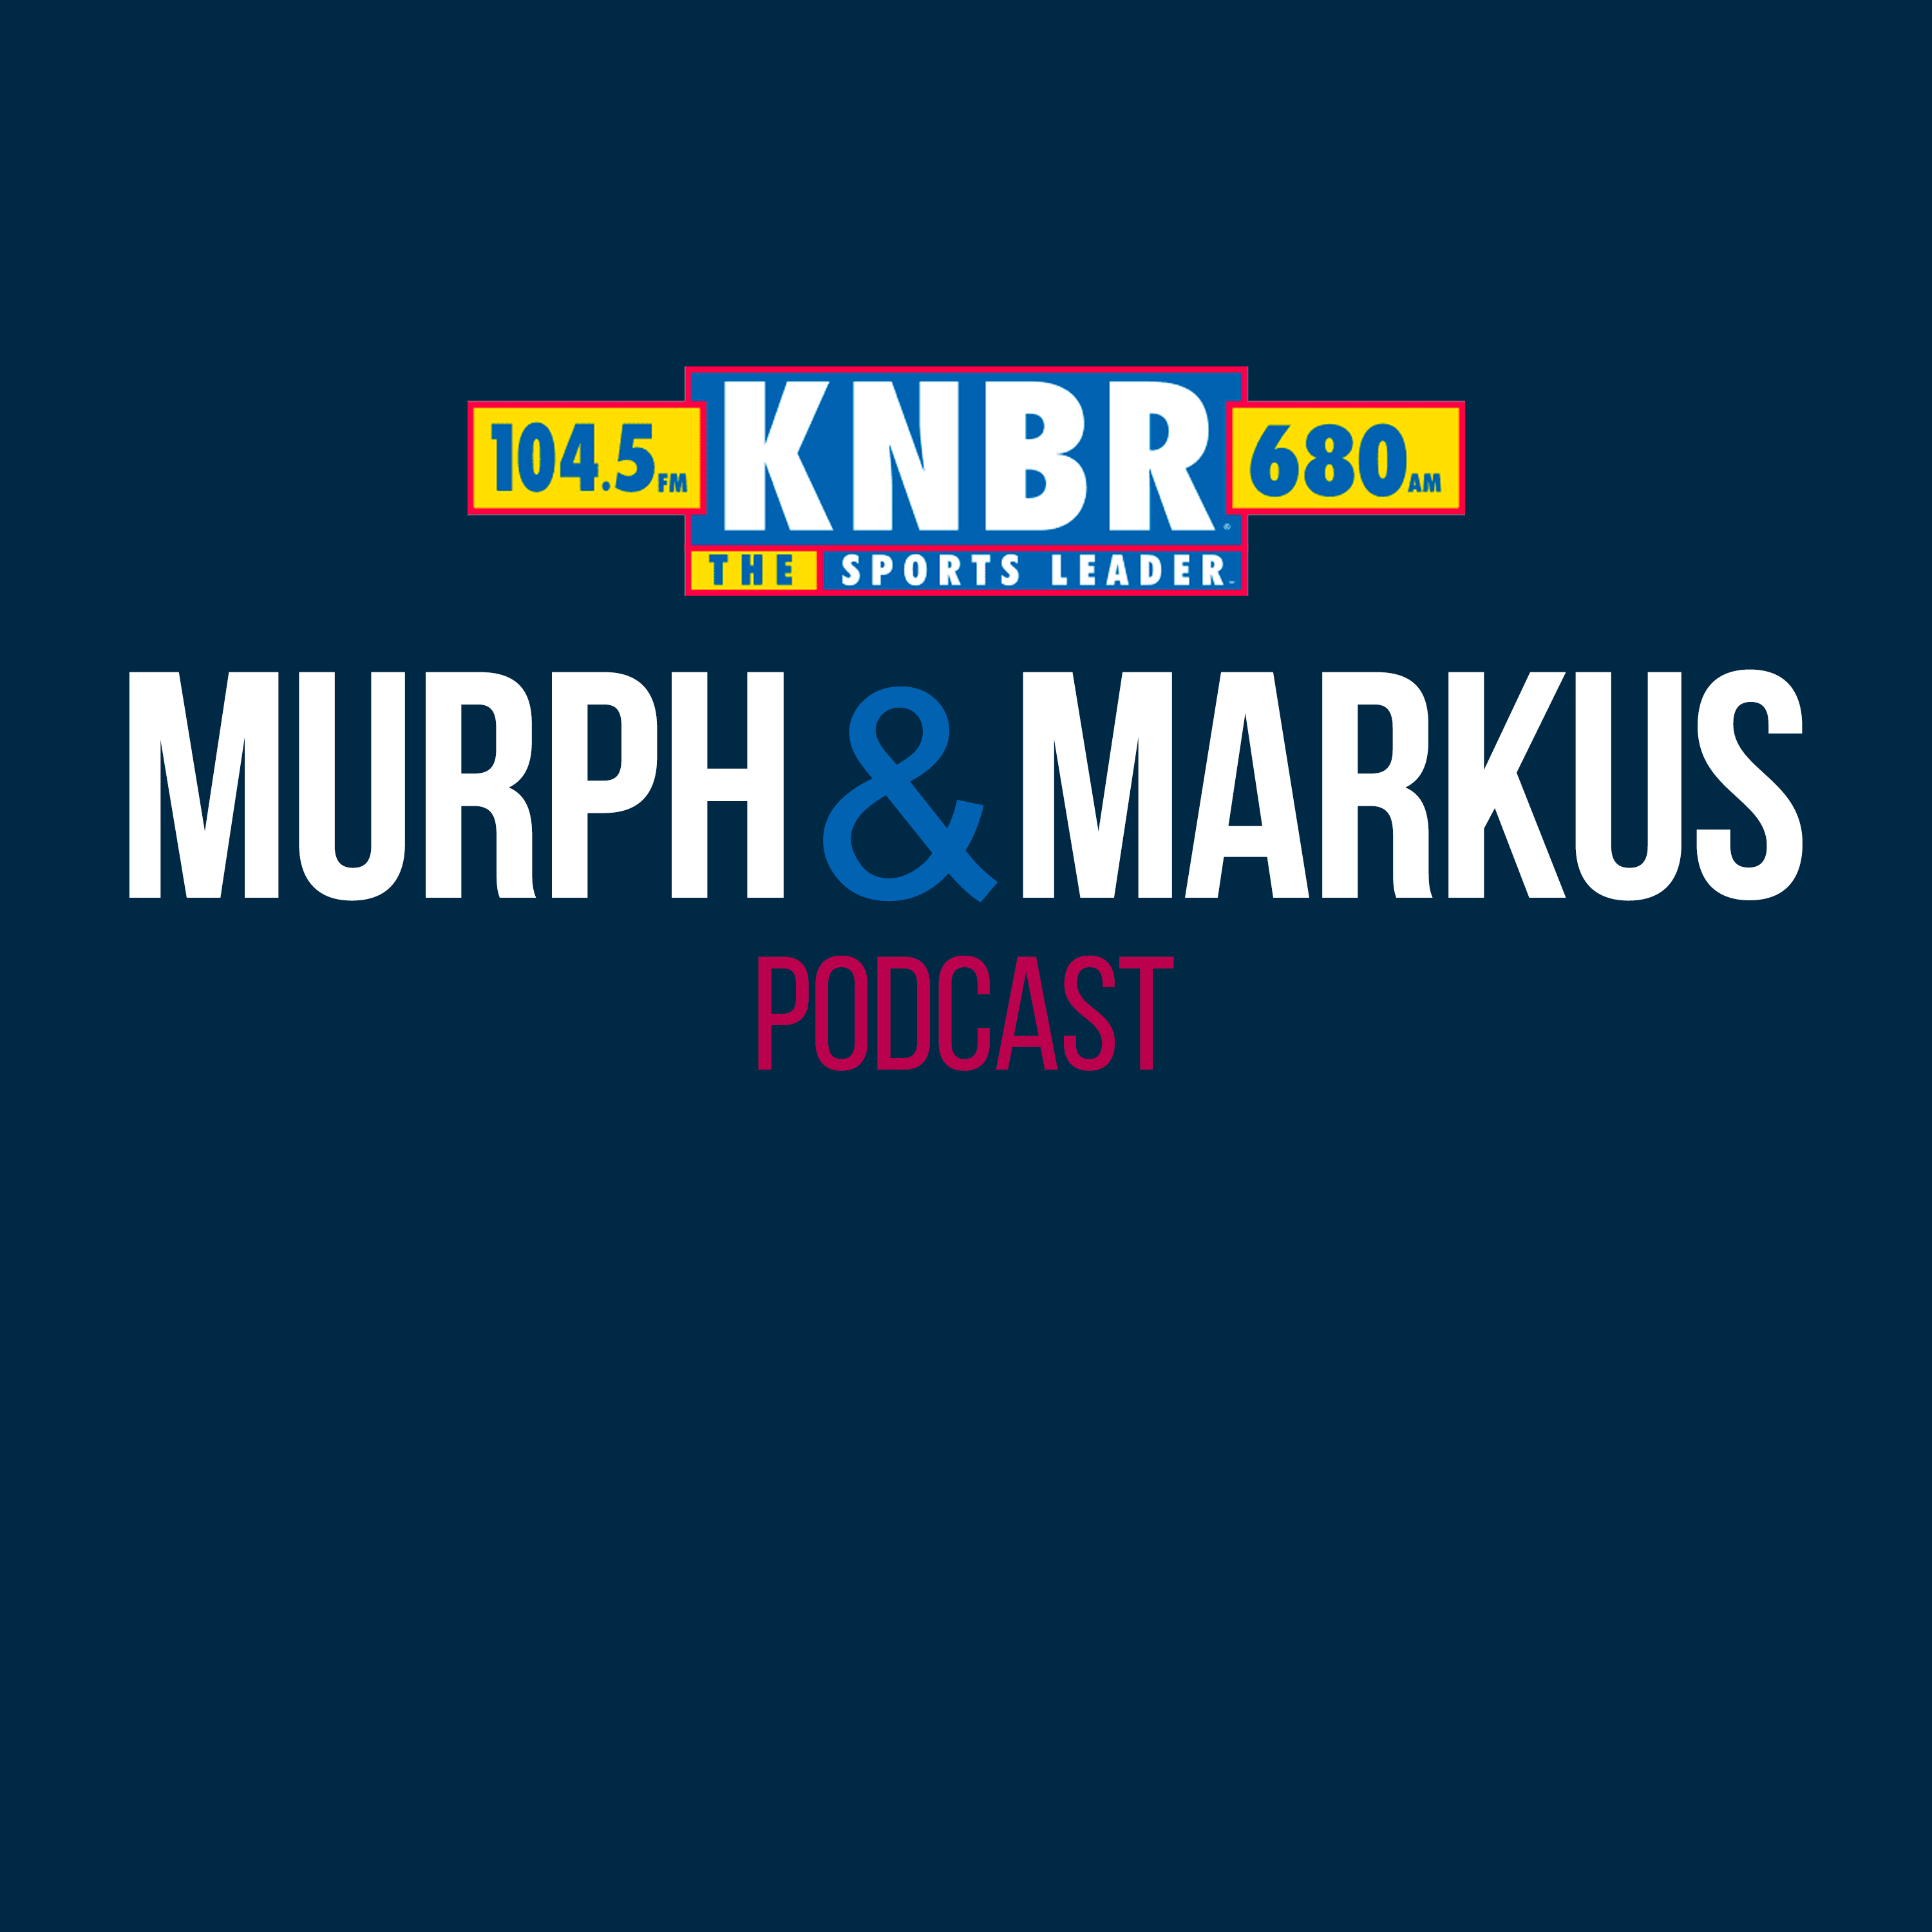 7-15 Hour 2: Murph & Markus react to Bryan Price's comments about the starting rotation after the All-Star break, talk to Mike Krukow, and get into today's top story in the Big Hit